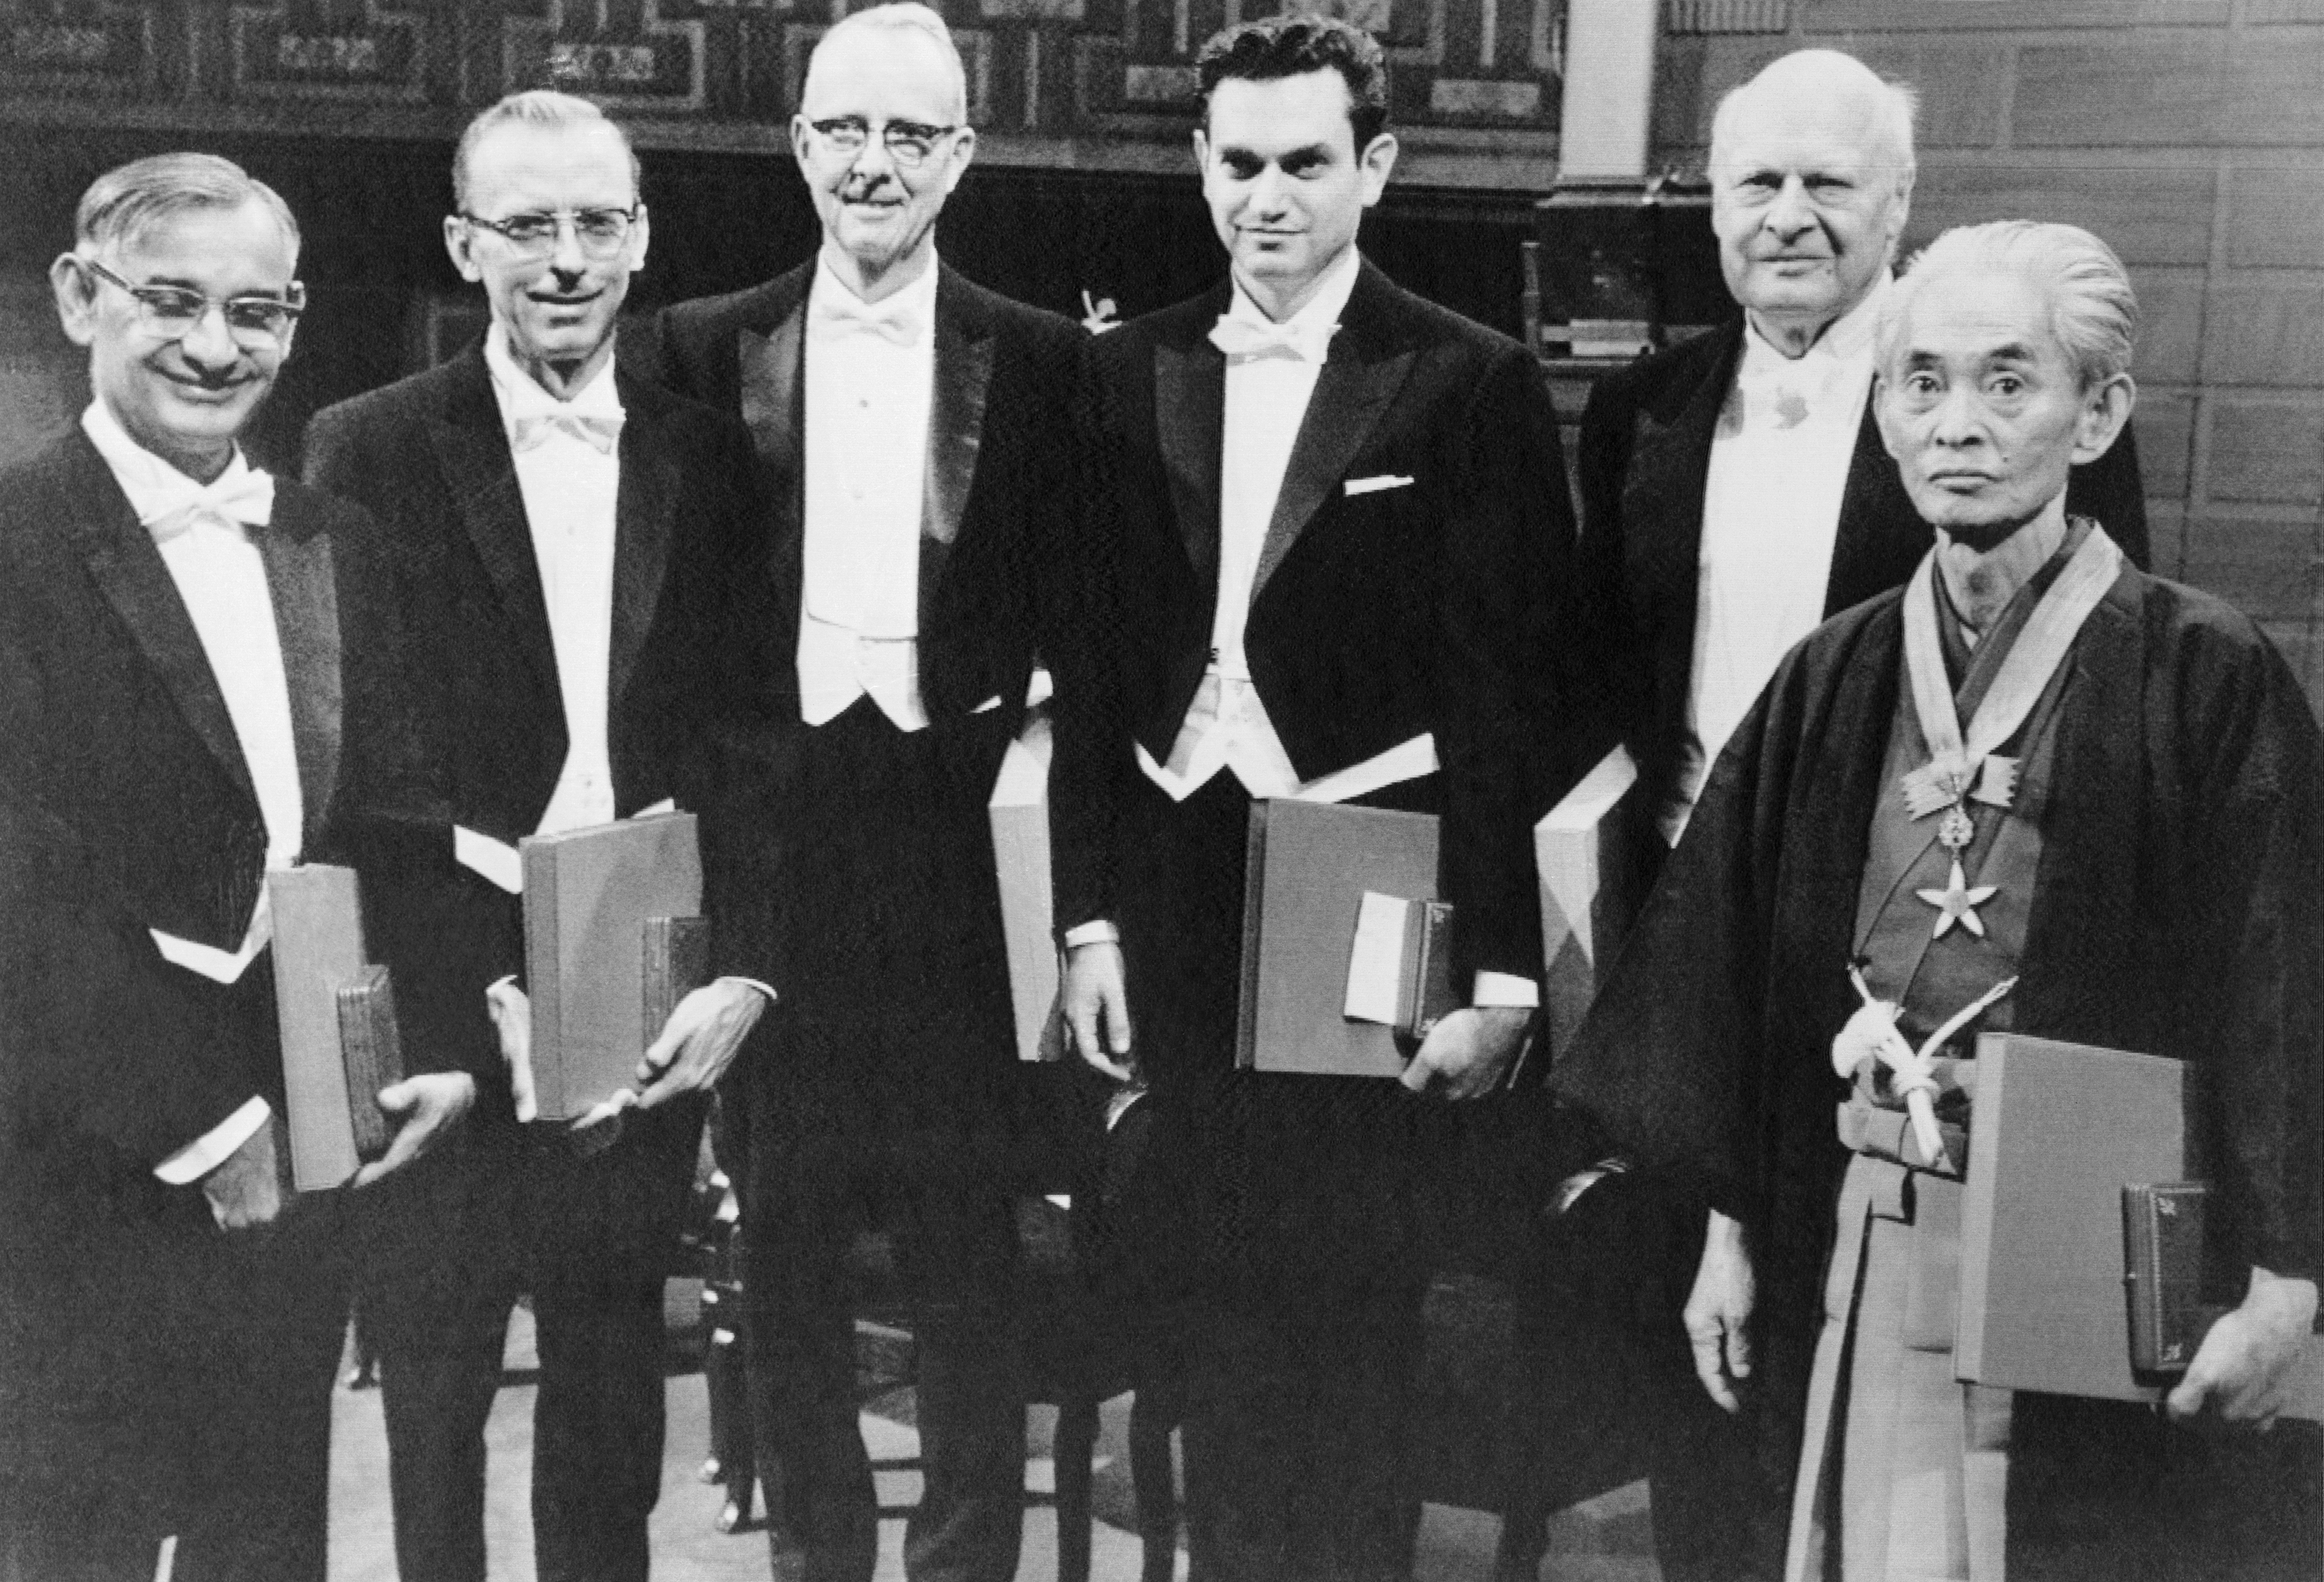 (Original Caption) Nobel Prize Winners. Stockholm: The 1968 Nobel Prize recipients, five Americans and one Japanese where judged to have 